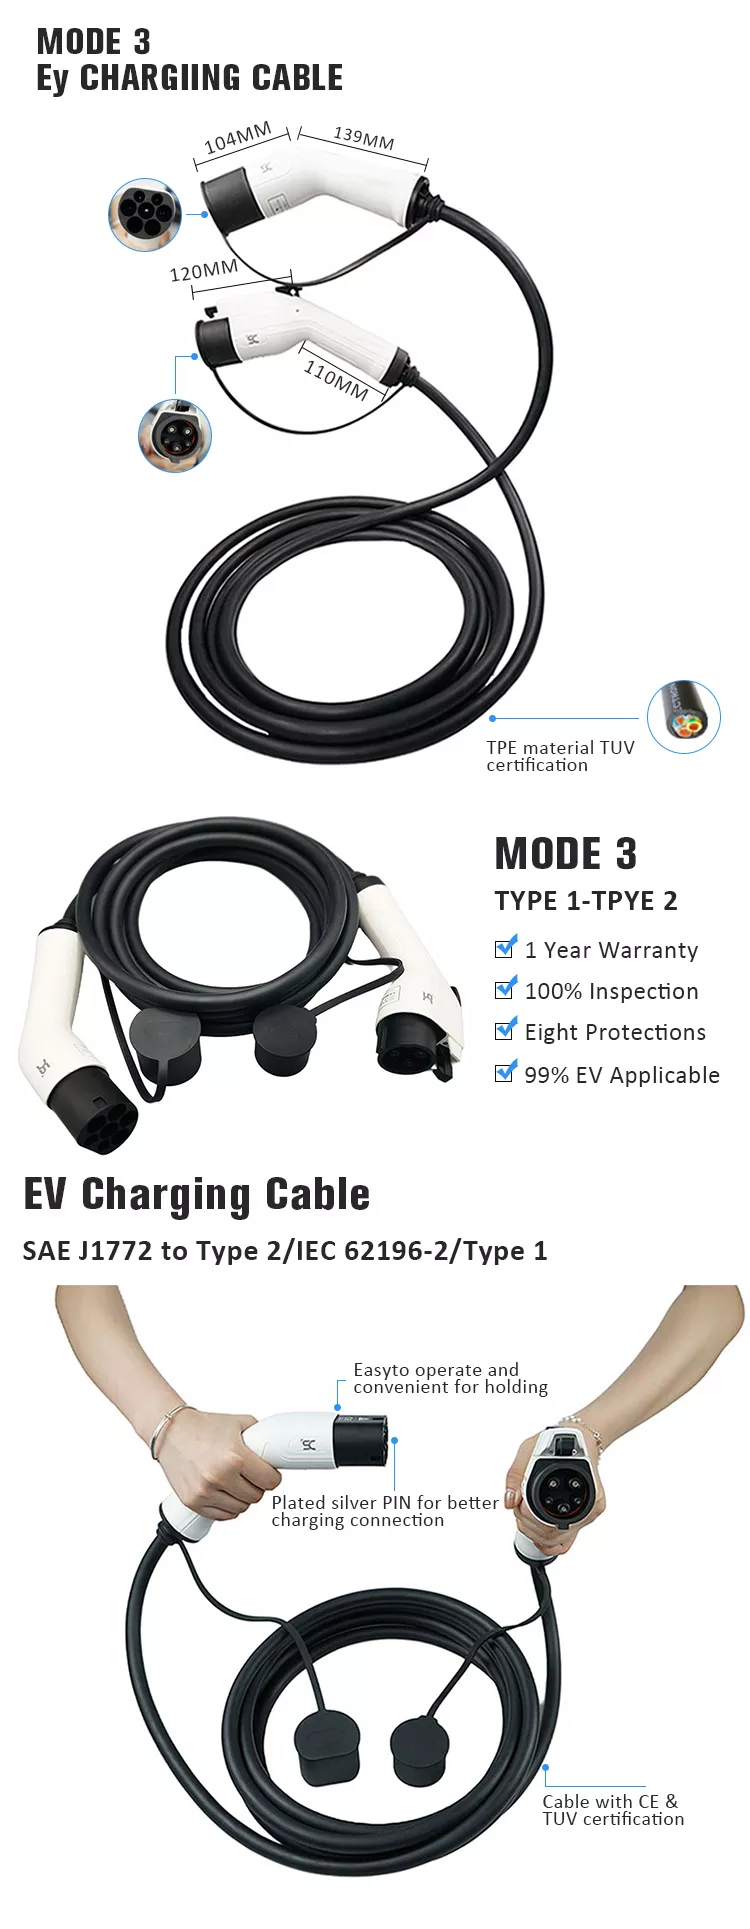 3.6Kw/7.2Kw Type 2 to Type 1 EV Charging Cable